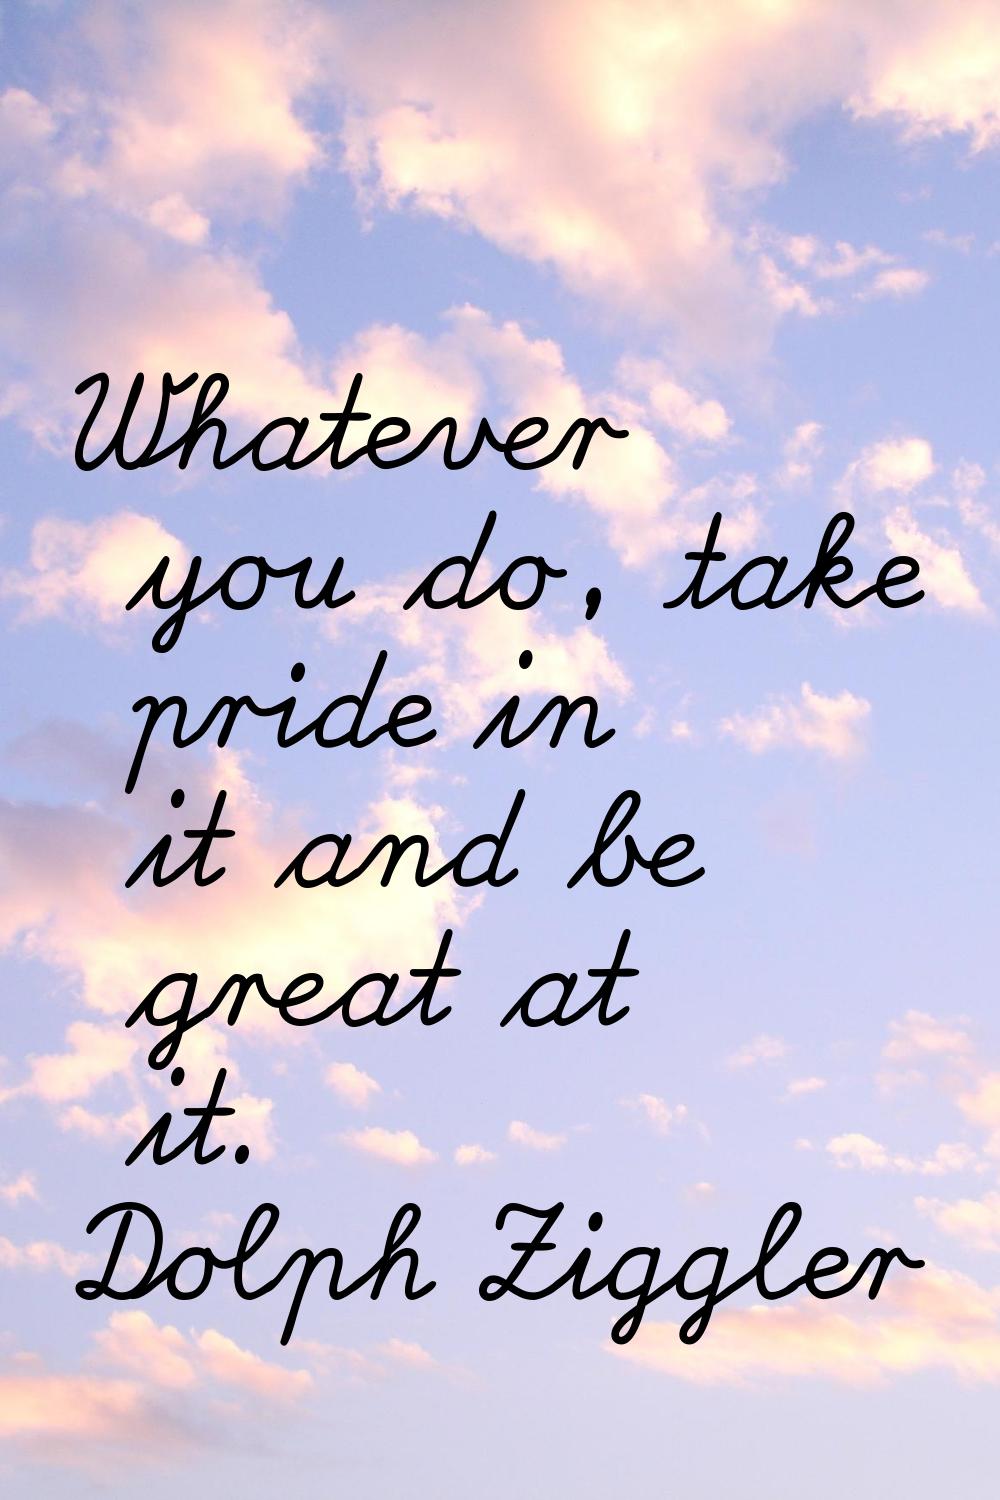 Whatever you do, take pride in it and be great at it.